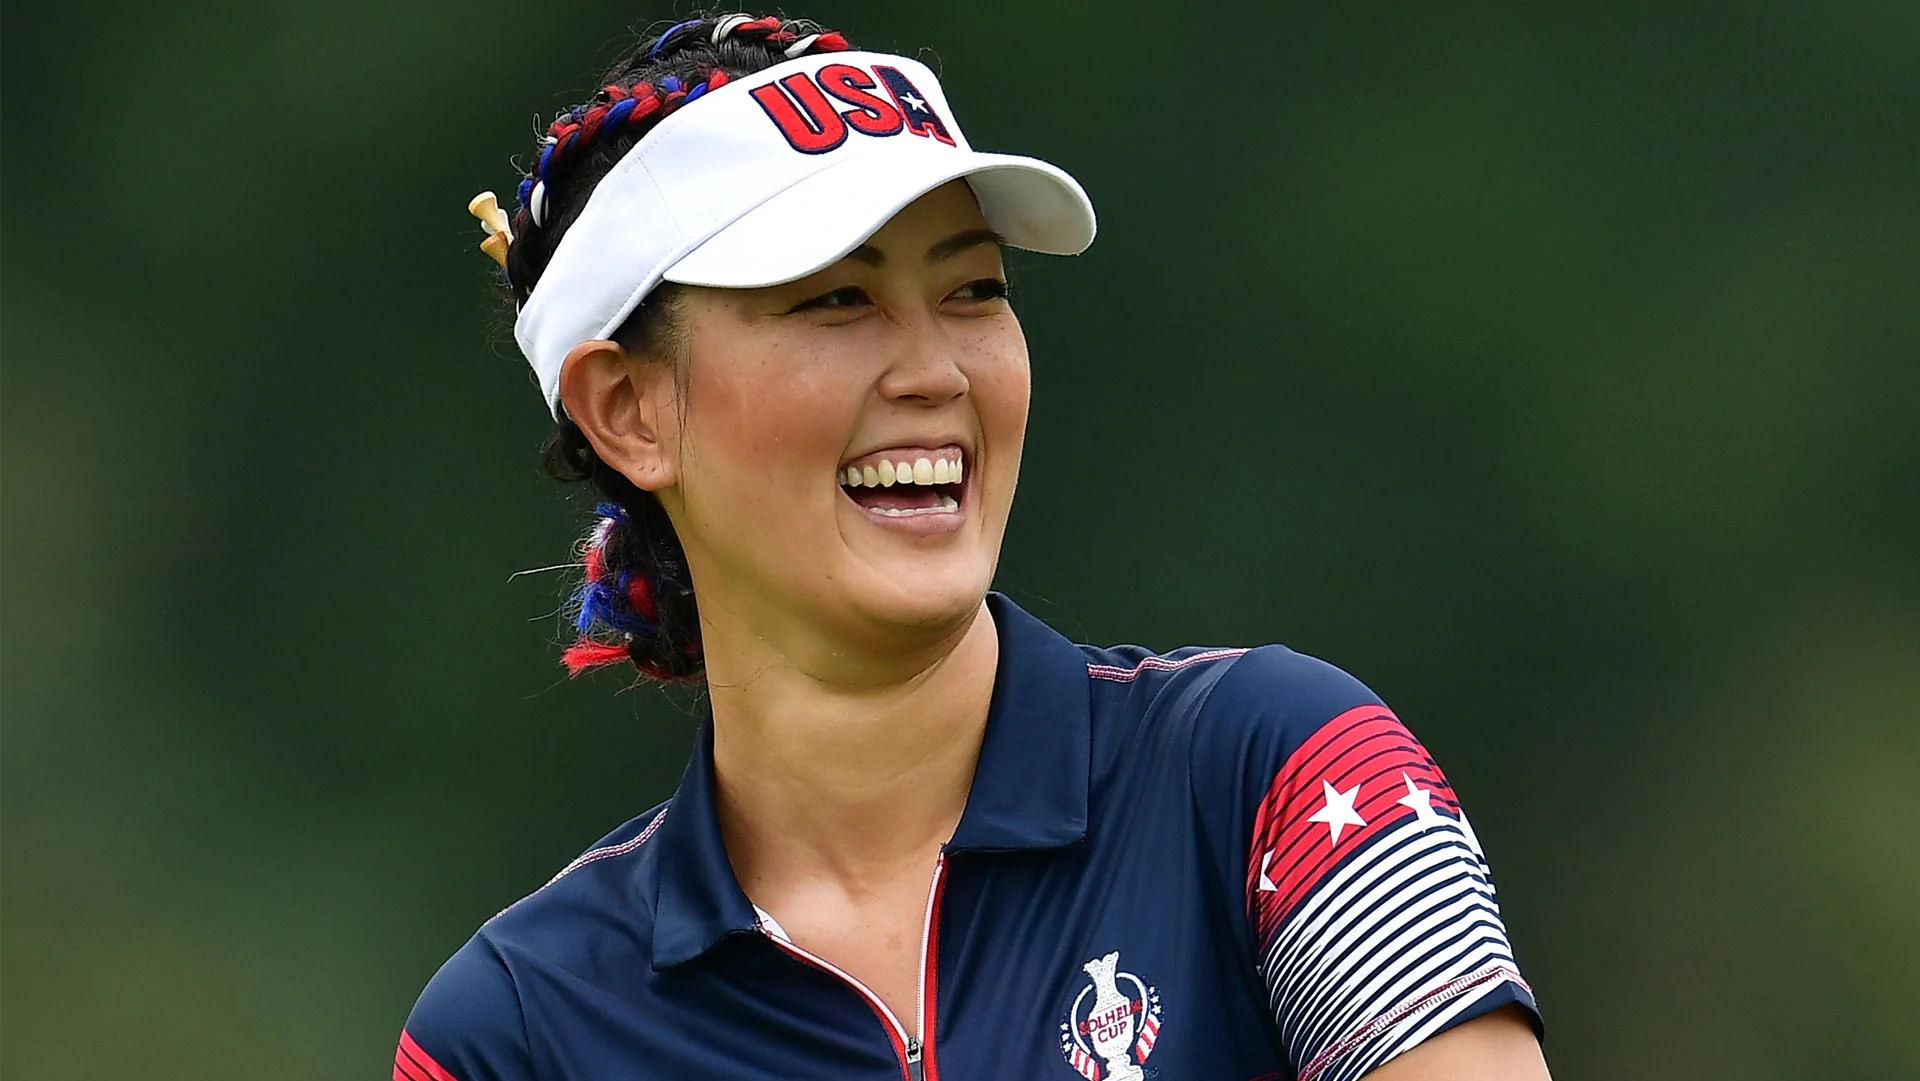 With shifted priorities, Michelle Wie West named Solheim Cup assistant captain